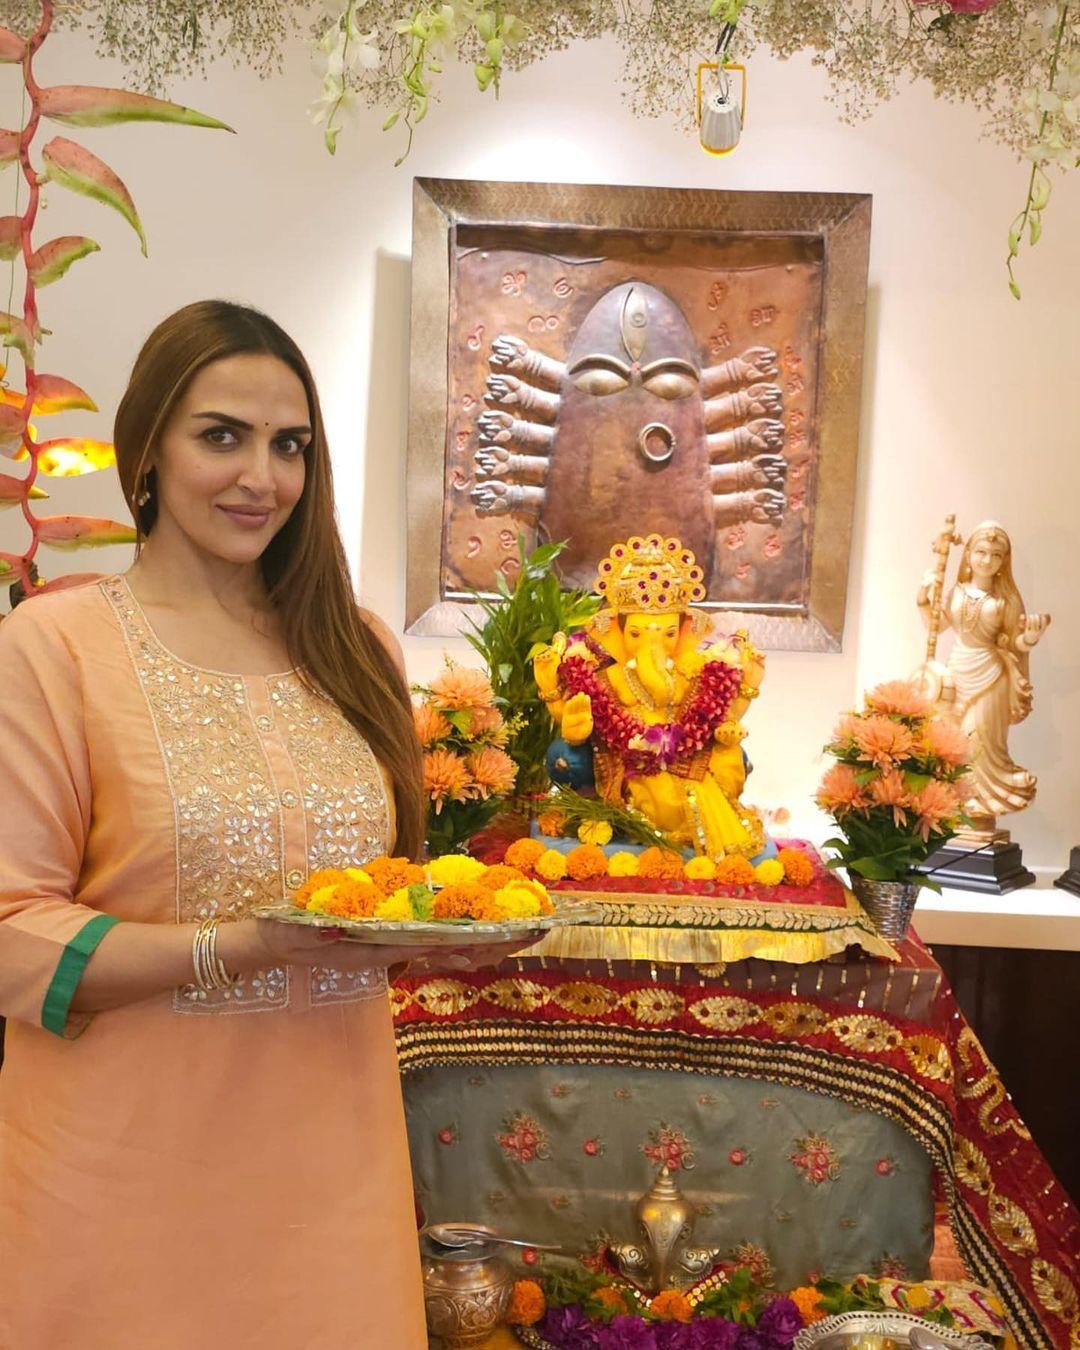 Esha Deol, the talented actress and daughter of legendary Bollywood stars Dharmendra and Hema Malini, embraced the spirit of Ganesh Chaturthi in an orange kurti.